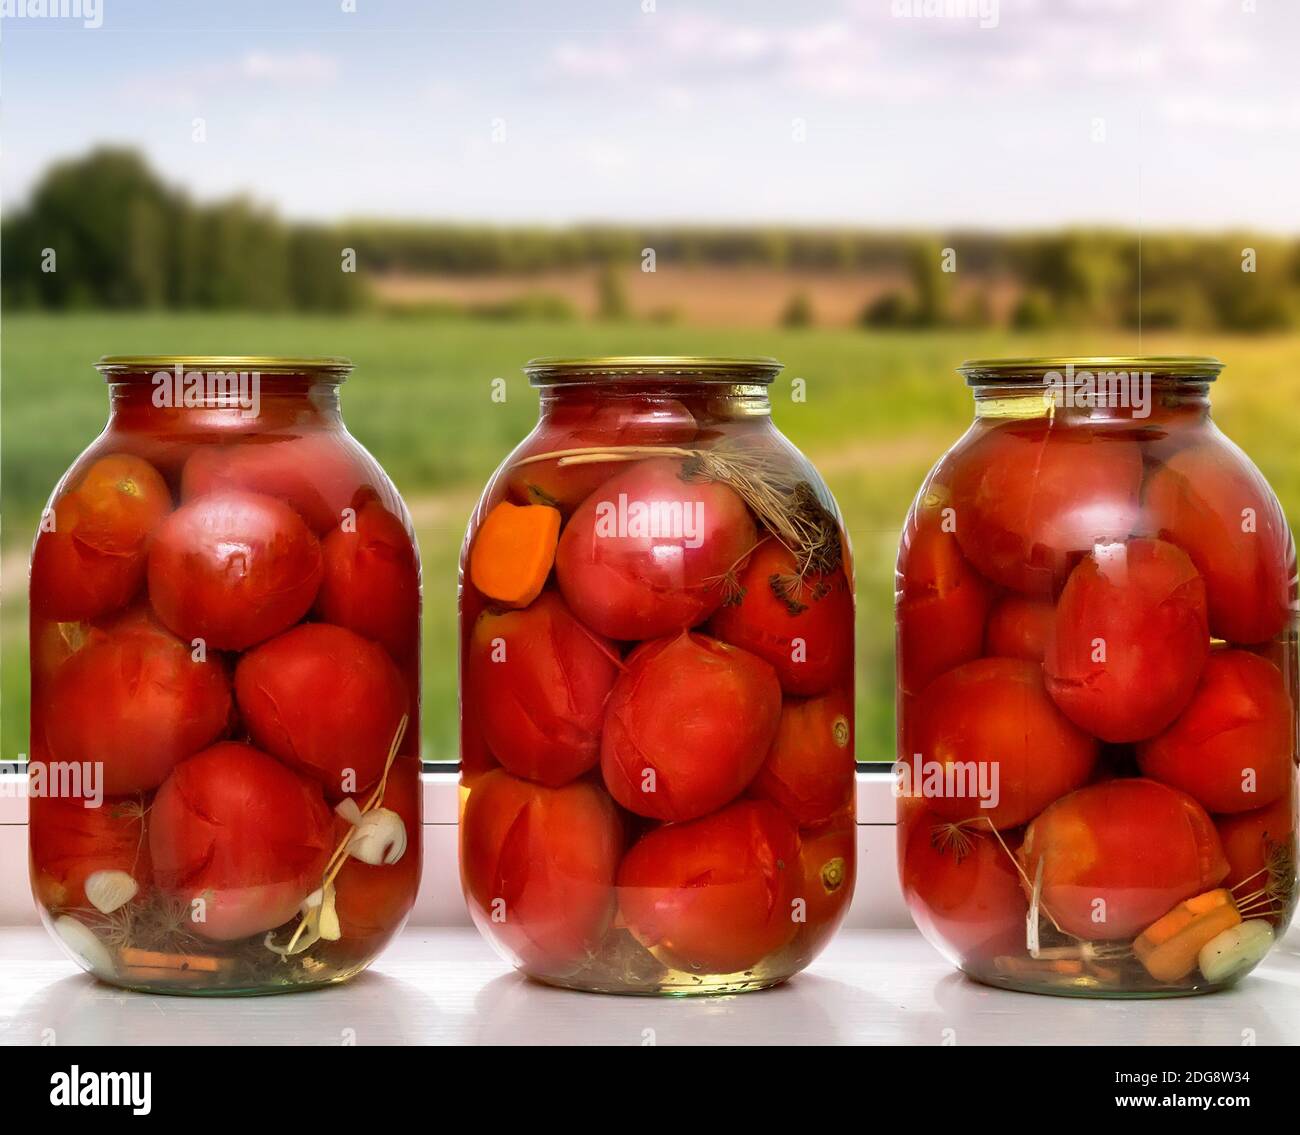 Canned tomatoes in large glass jars. Stock Photo